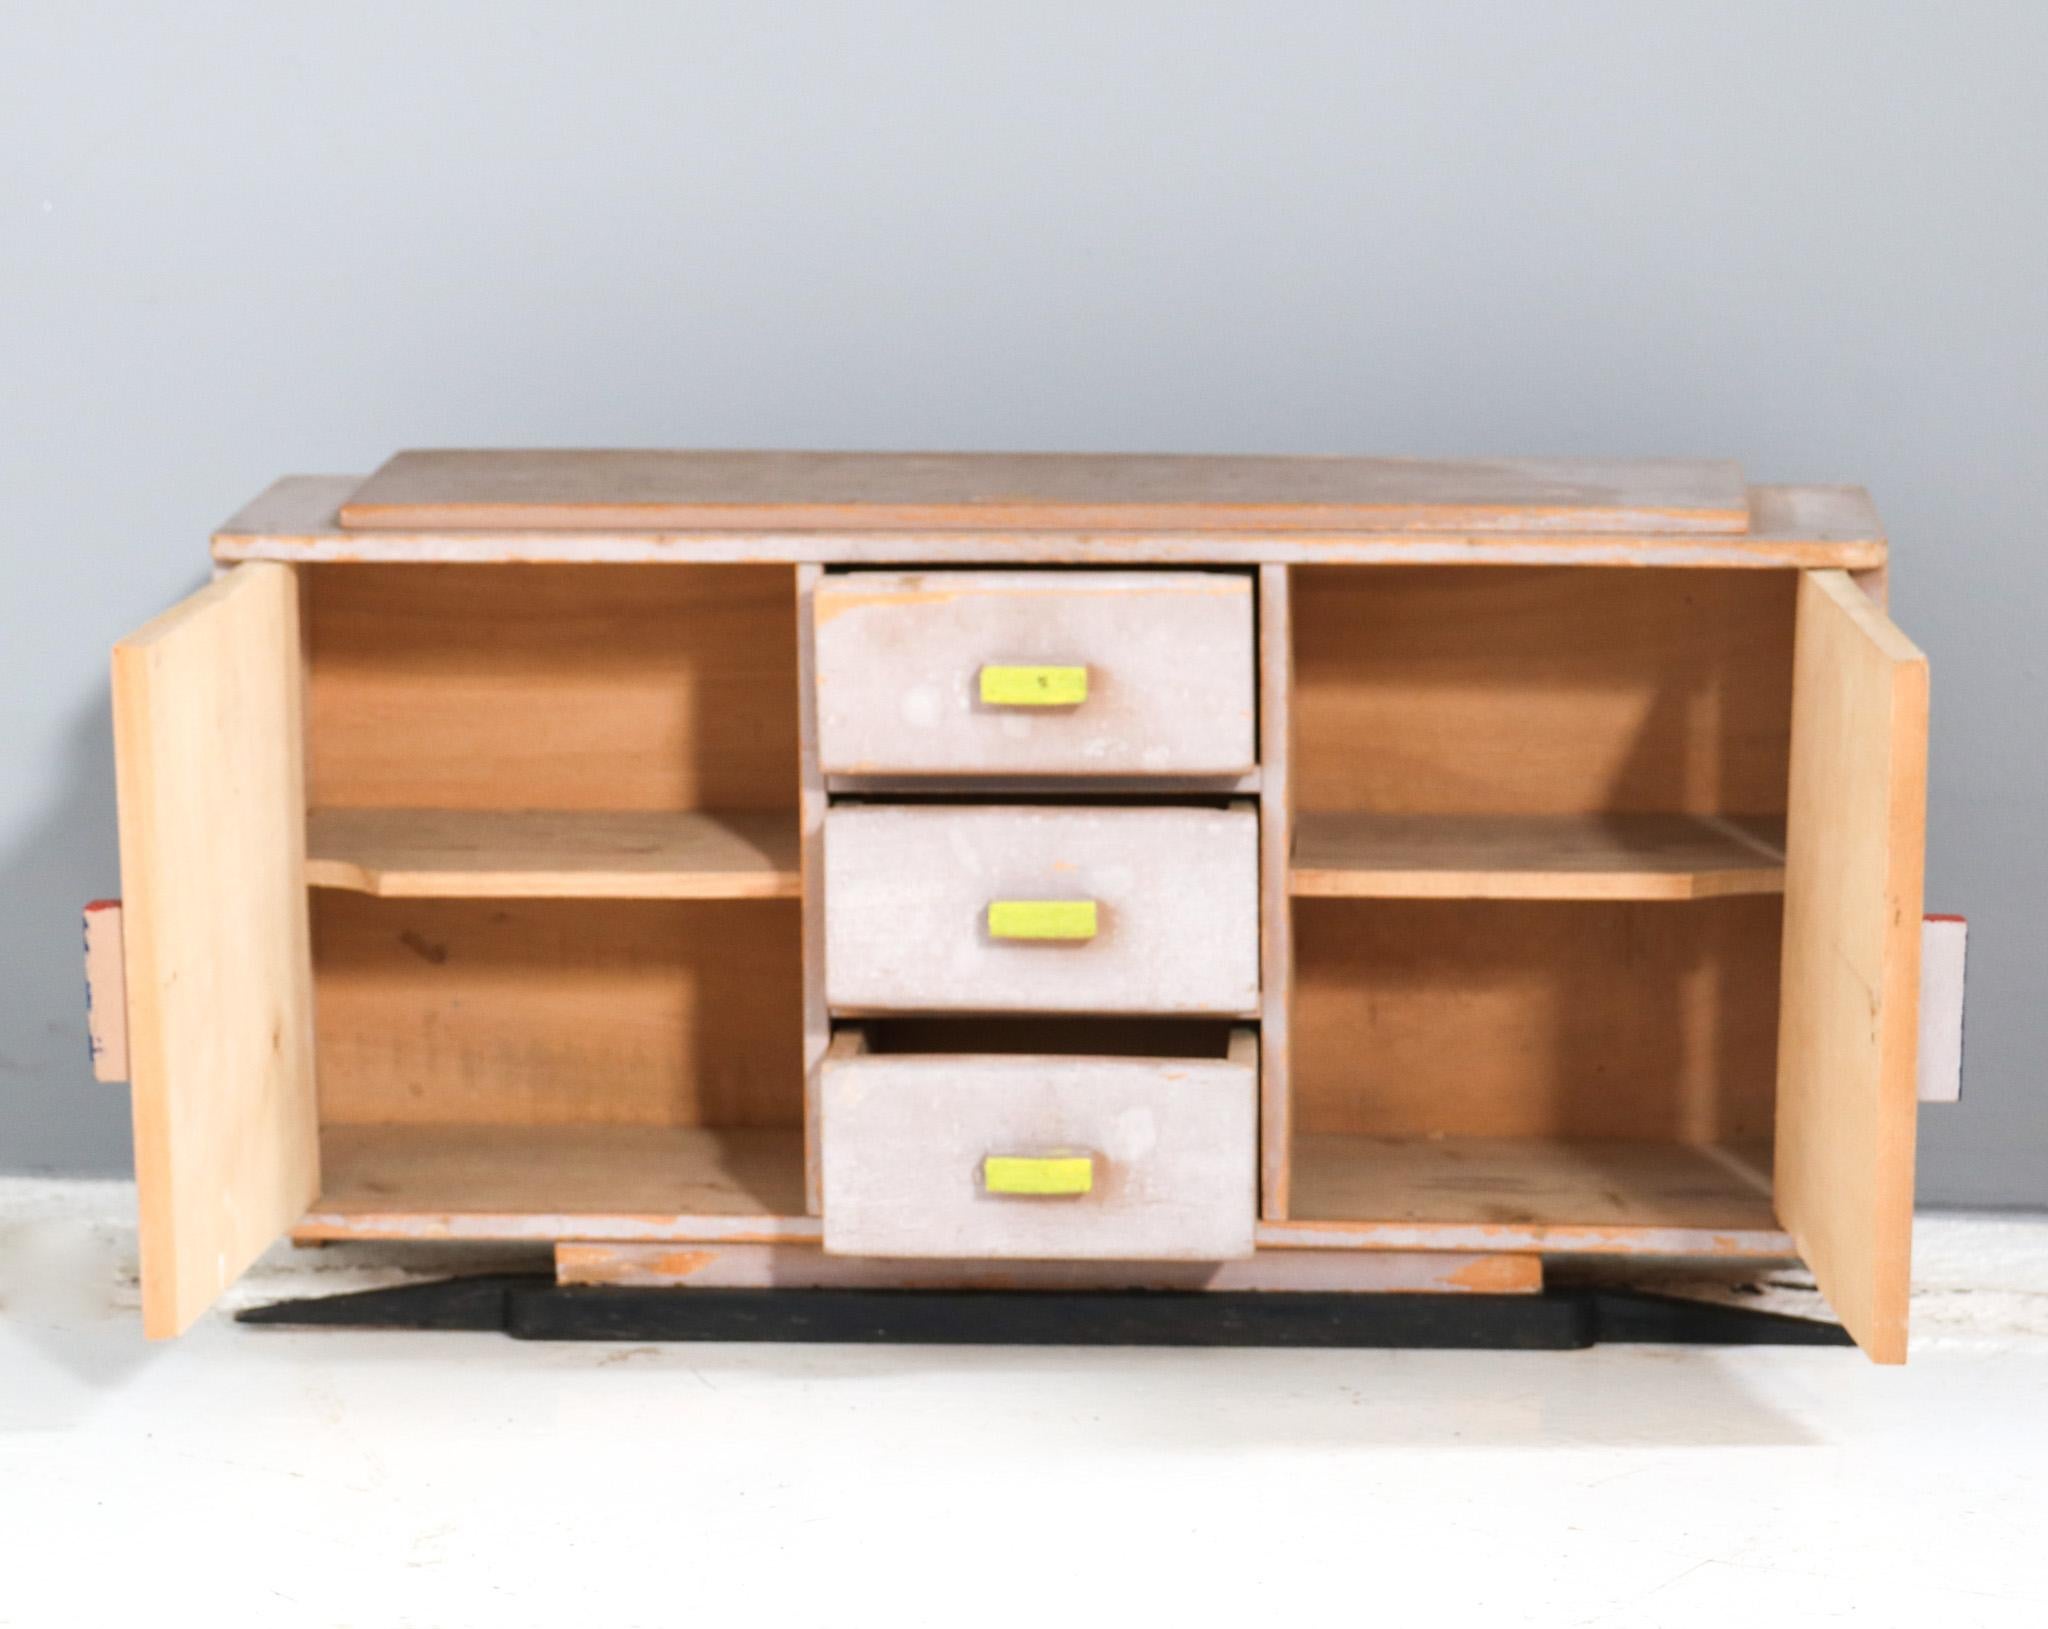 Lacquered Plywood Art Deco Modernist Children's Furniture Credenza, 1930s In Good Condition For Sale In Amsterdam, NL